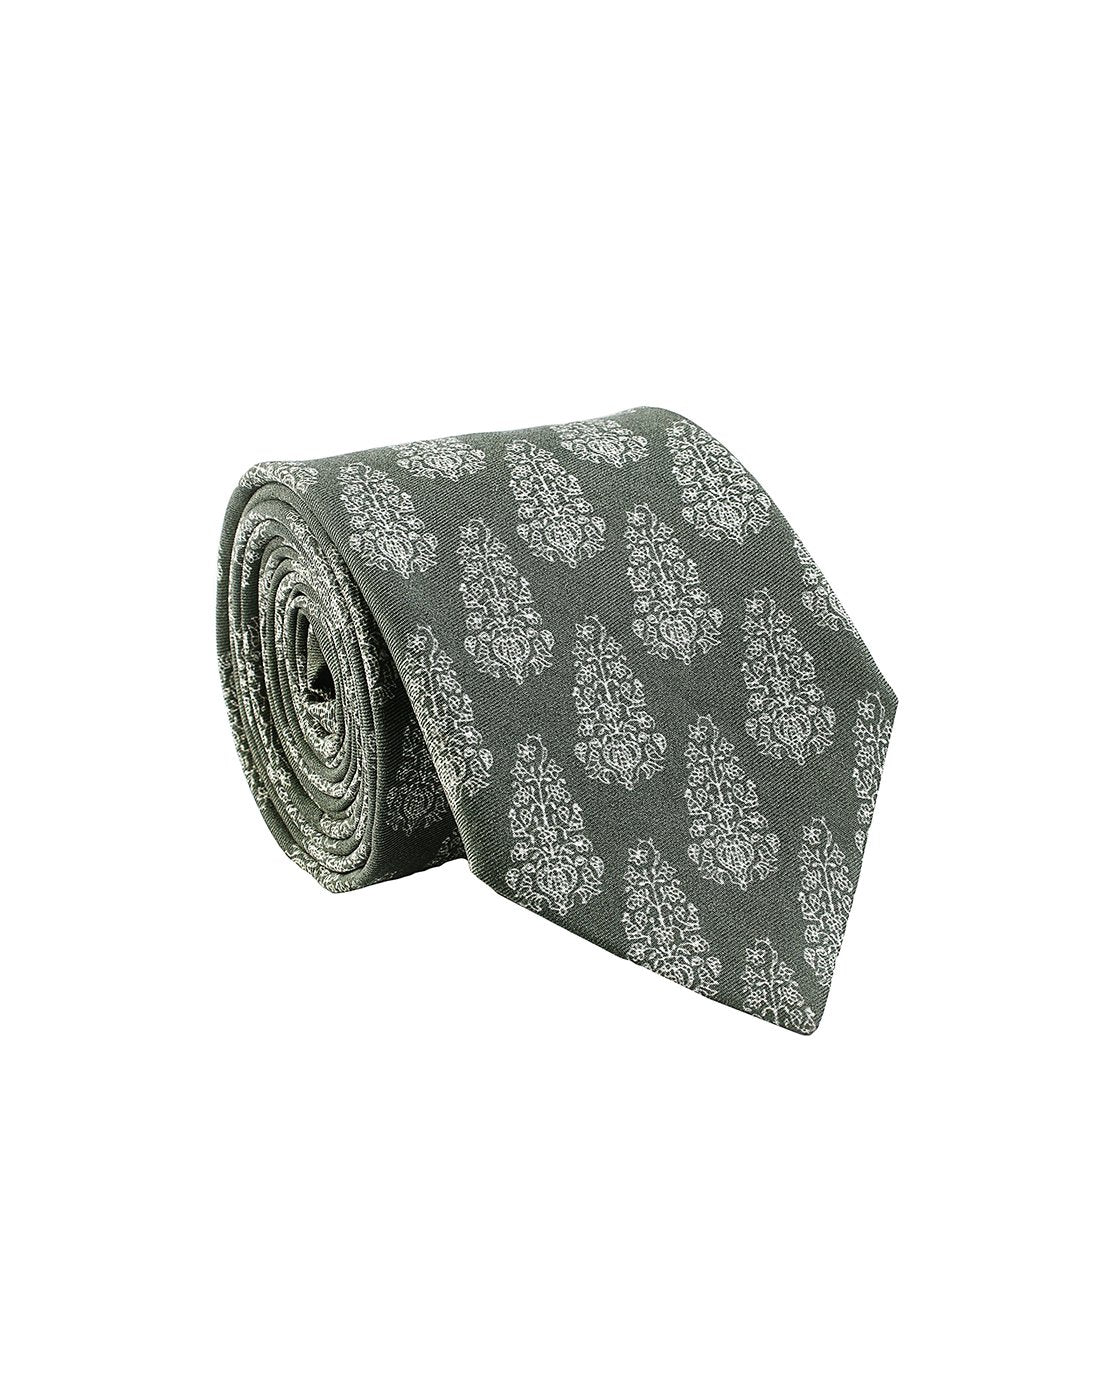 Chokore Special 3-in-1 Indian at Heart Gift Set, Gray (Pocket Square, Tie, & Cufflinks)